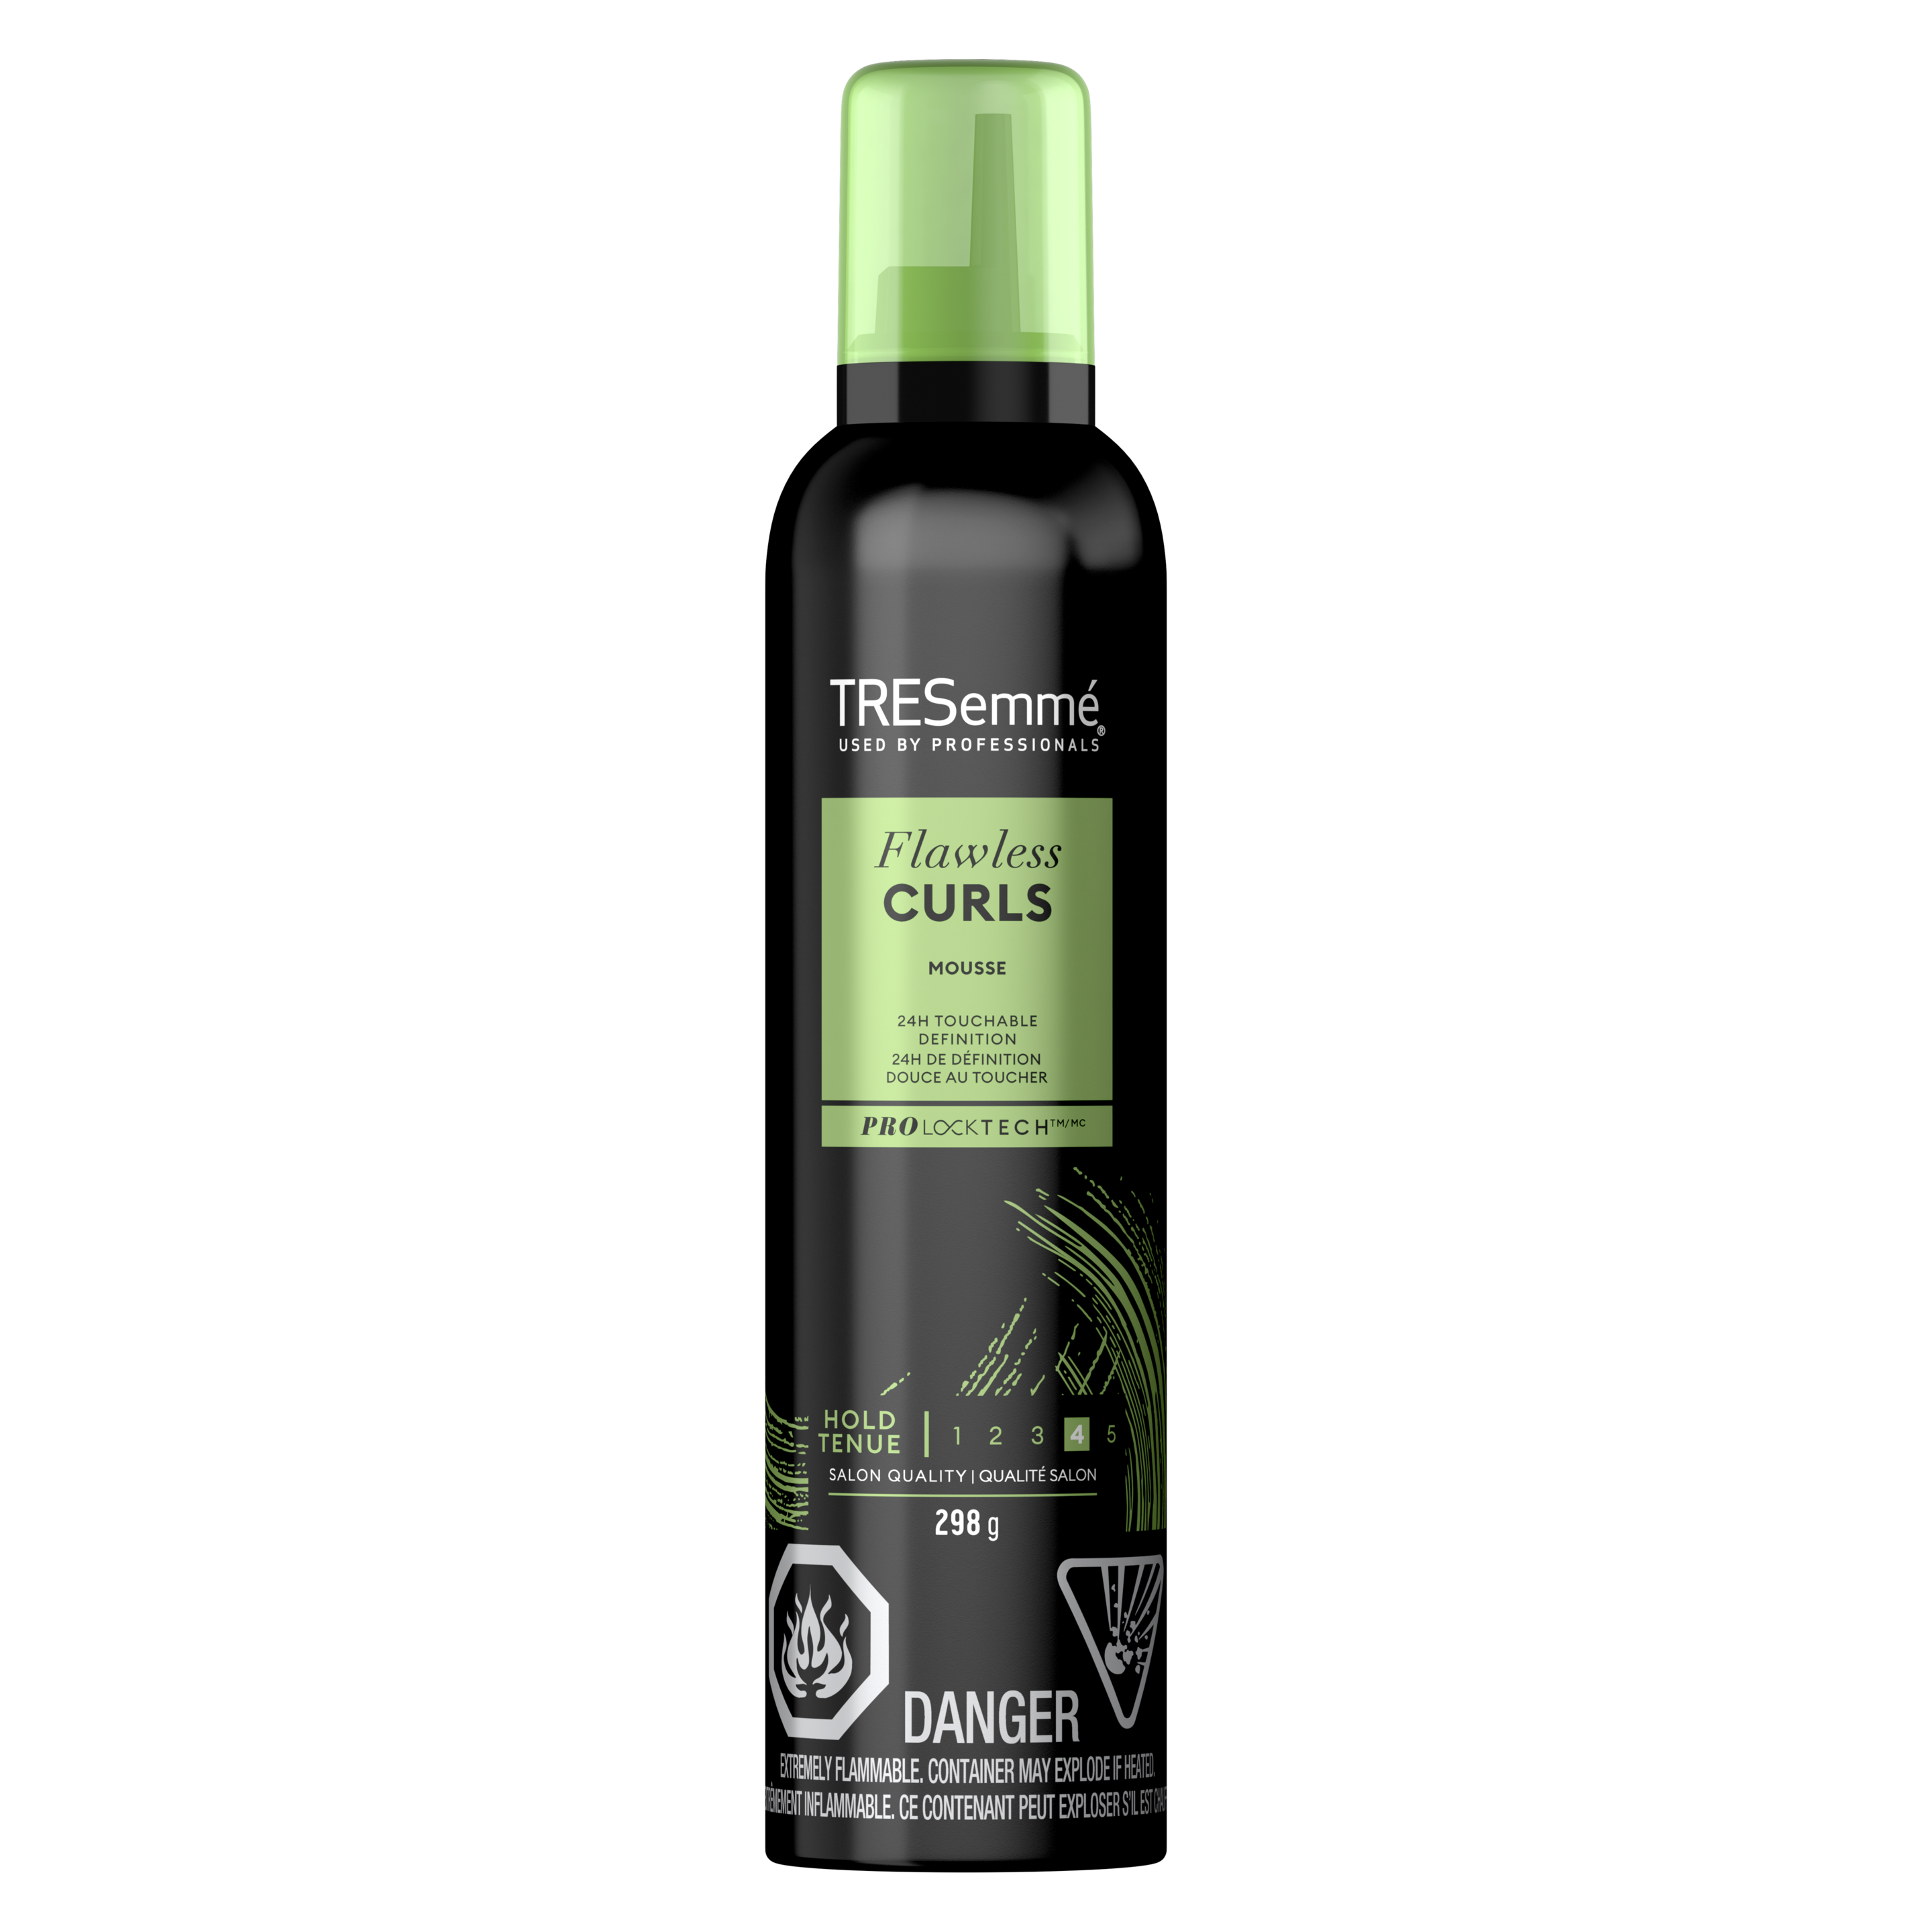 A 298 g bottle of Flawless Curls Mousse front of pack image